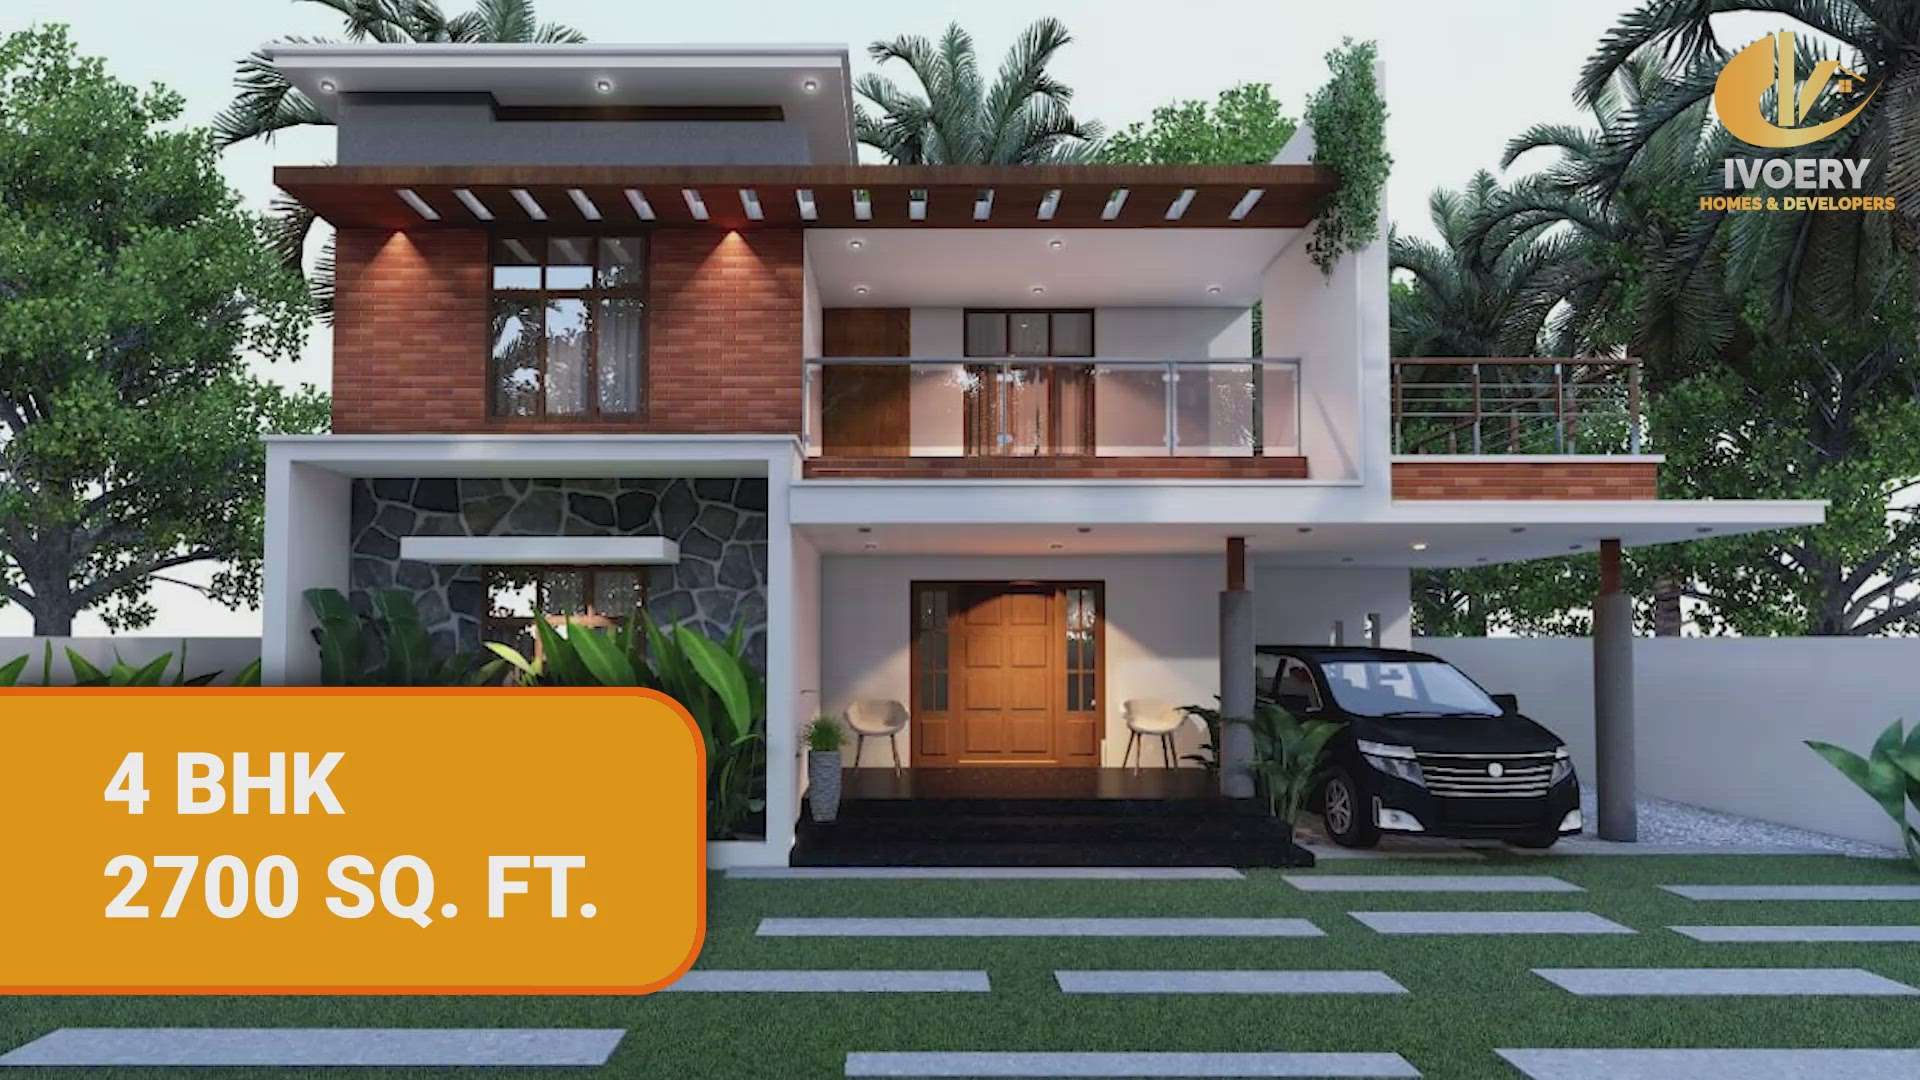 4BHK 2700 sq ft
Contact us immediately at 8055234222 for 3d visualization, interior designing and construction requirements. 

 #ivoeryhomes  #ivoeryhomesanddevelopers  #3d  #3Dvisualization  #InteriorDesigner  #HouseConstruction  #constructioncompany  #ConstructionCompaniesInKerala